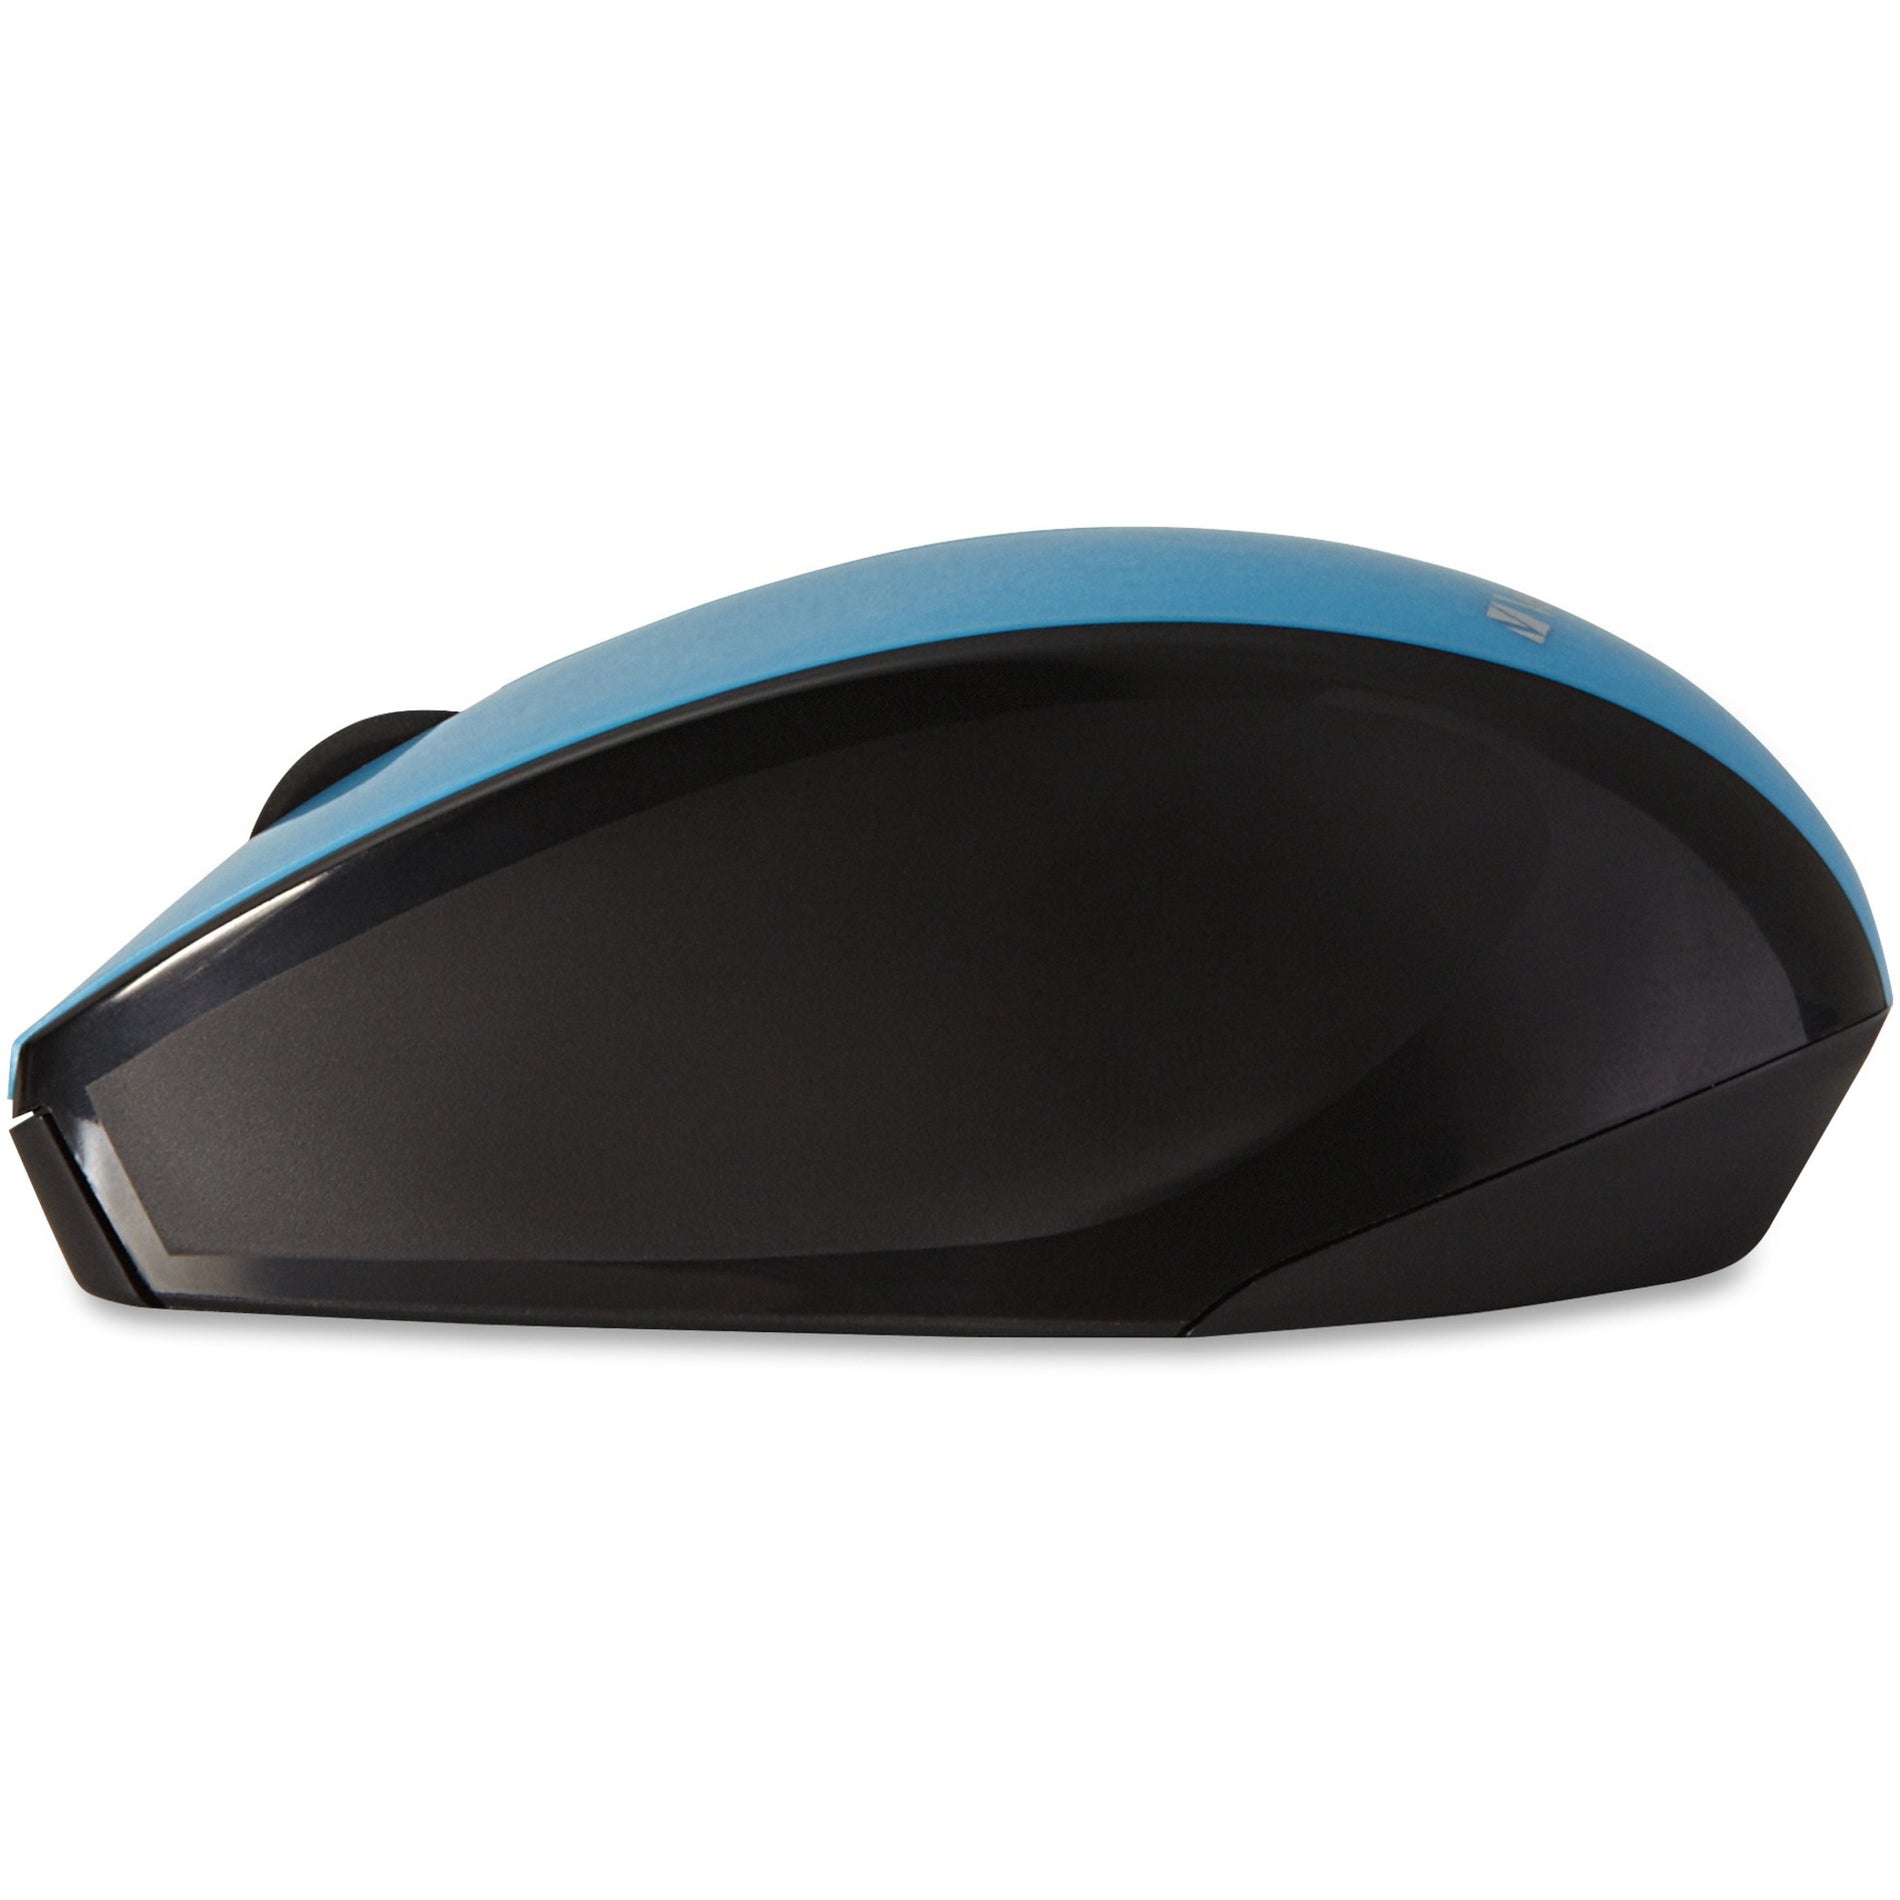 Verbatim 97993 Wireless Multi-trac LED Optical Mouse, Blue - Reliable and Ergonomic Computer Mouse with Blue LED Technology